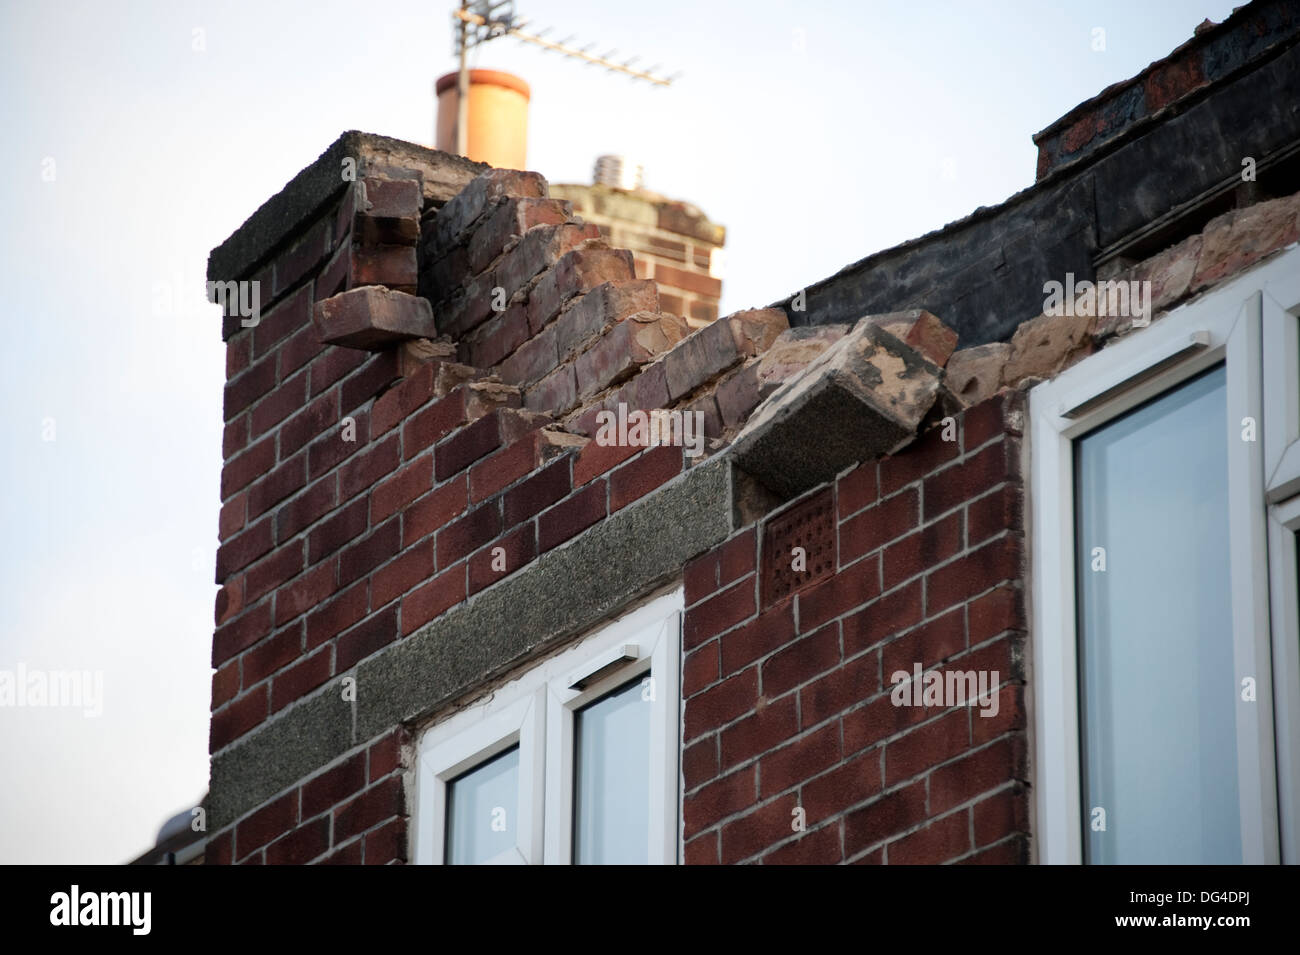 Brickwork fallen from house in high winds storm Stock Photo